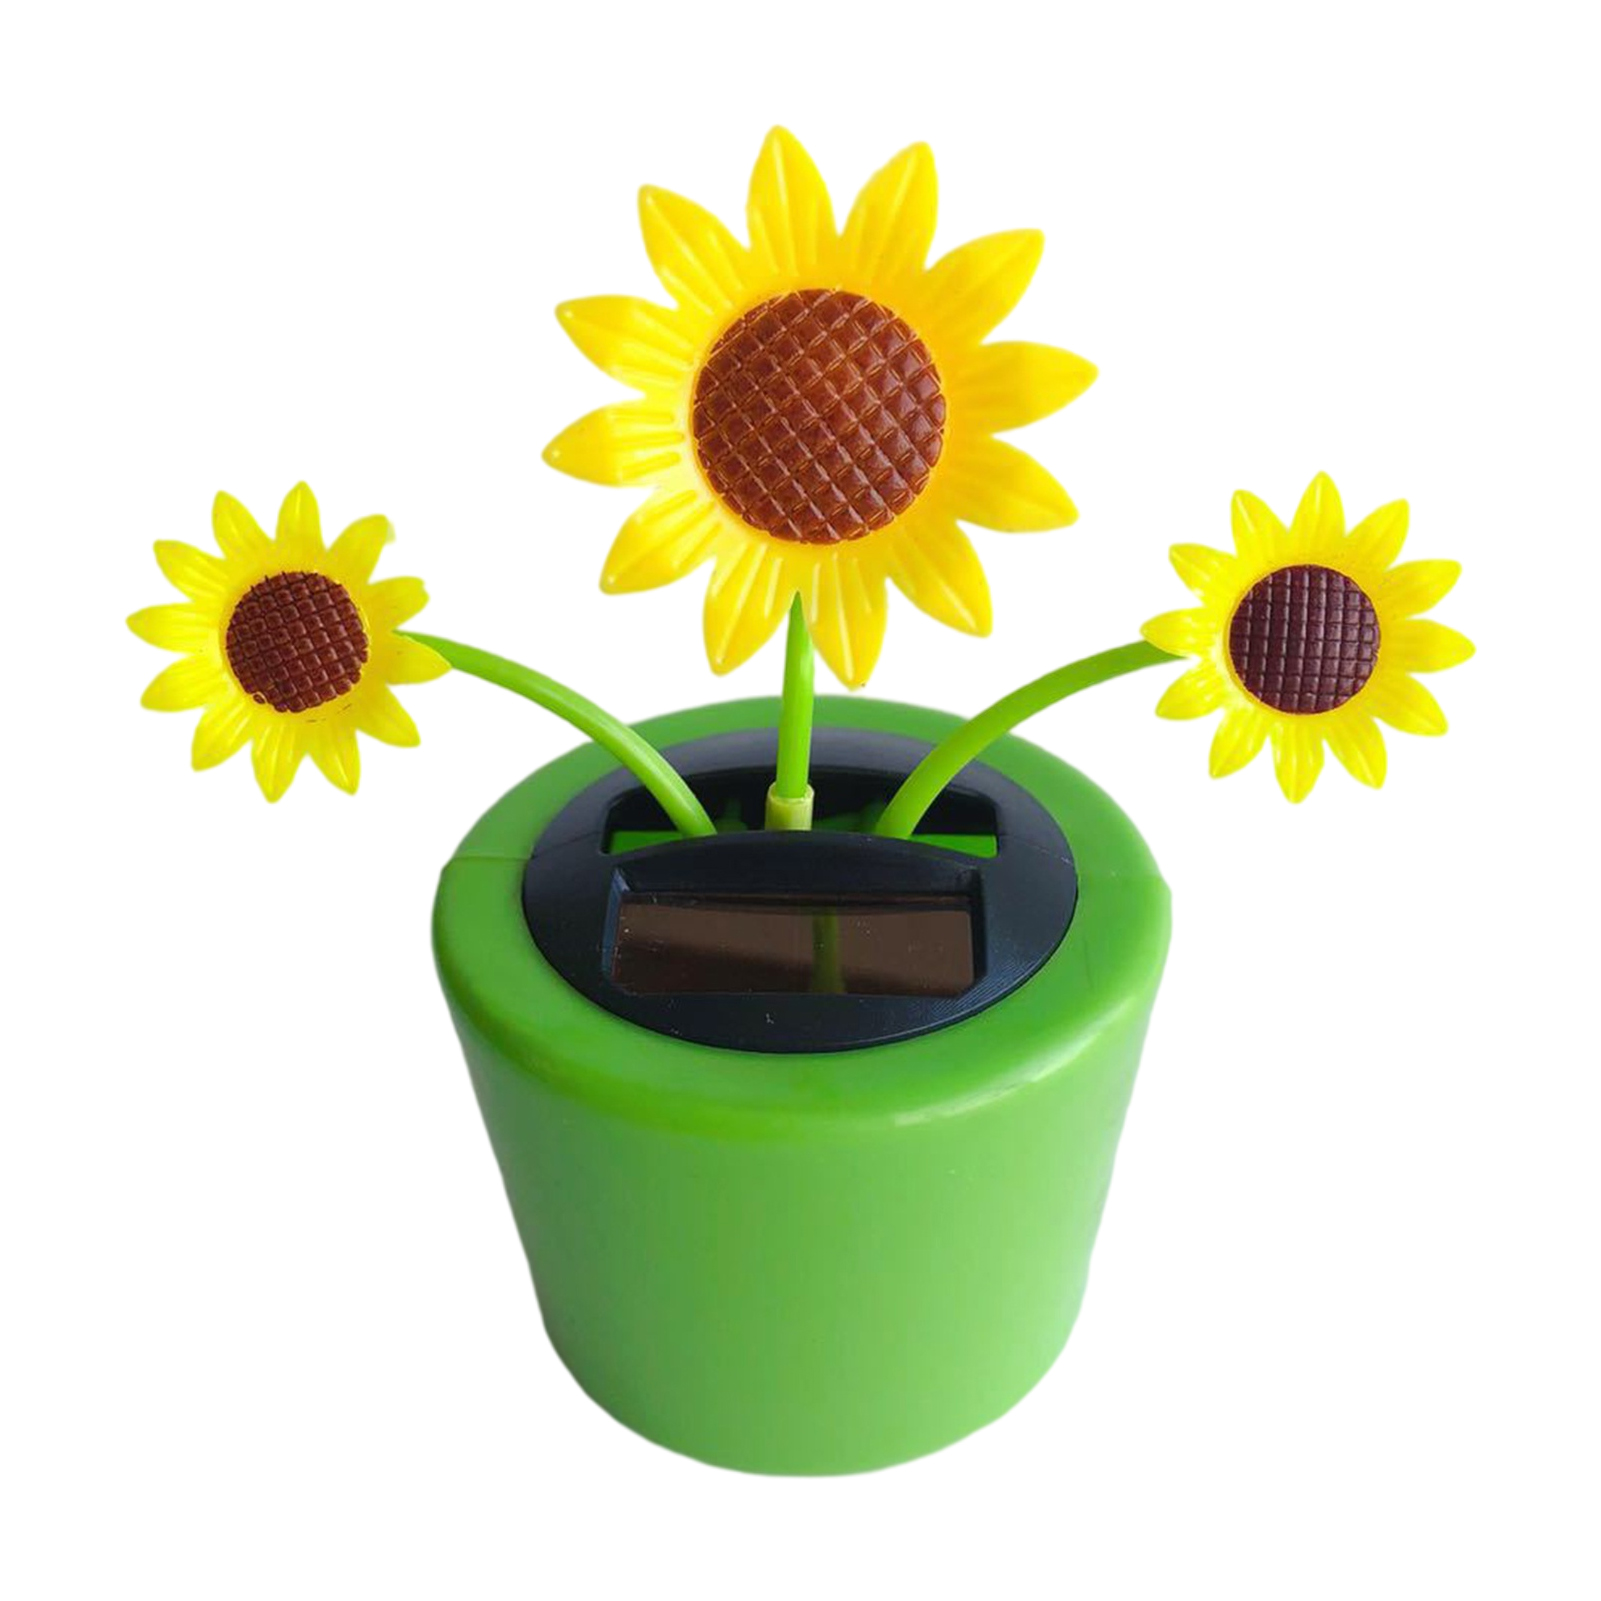 Cute Solar Power Flip Flap Flower Insect for Car Decoration Swing Dancing Flower Eco-Friendly Bobblehead Solar Dancing Flowers in Colorful Pots - image 1 of 8